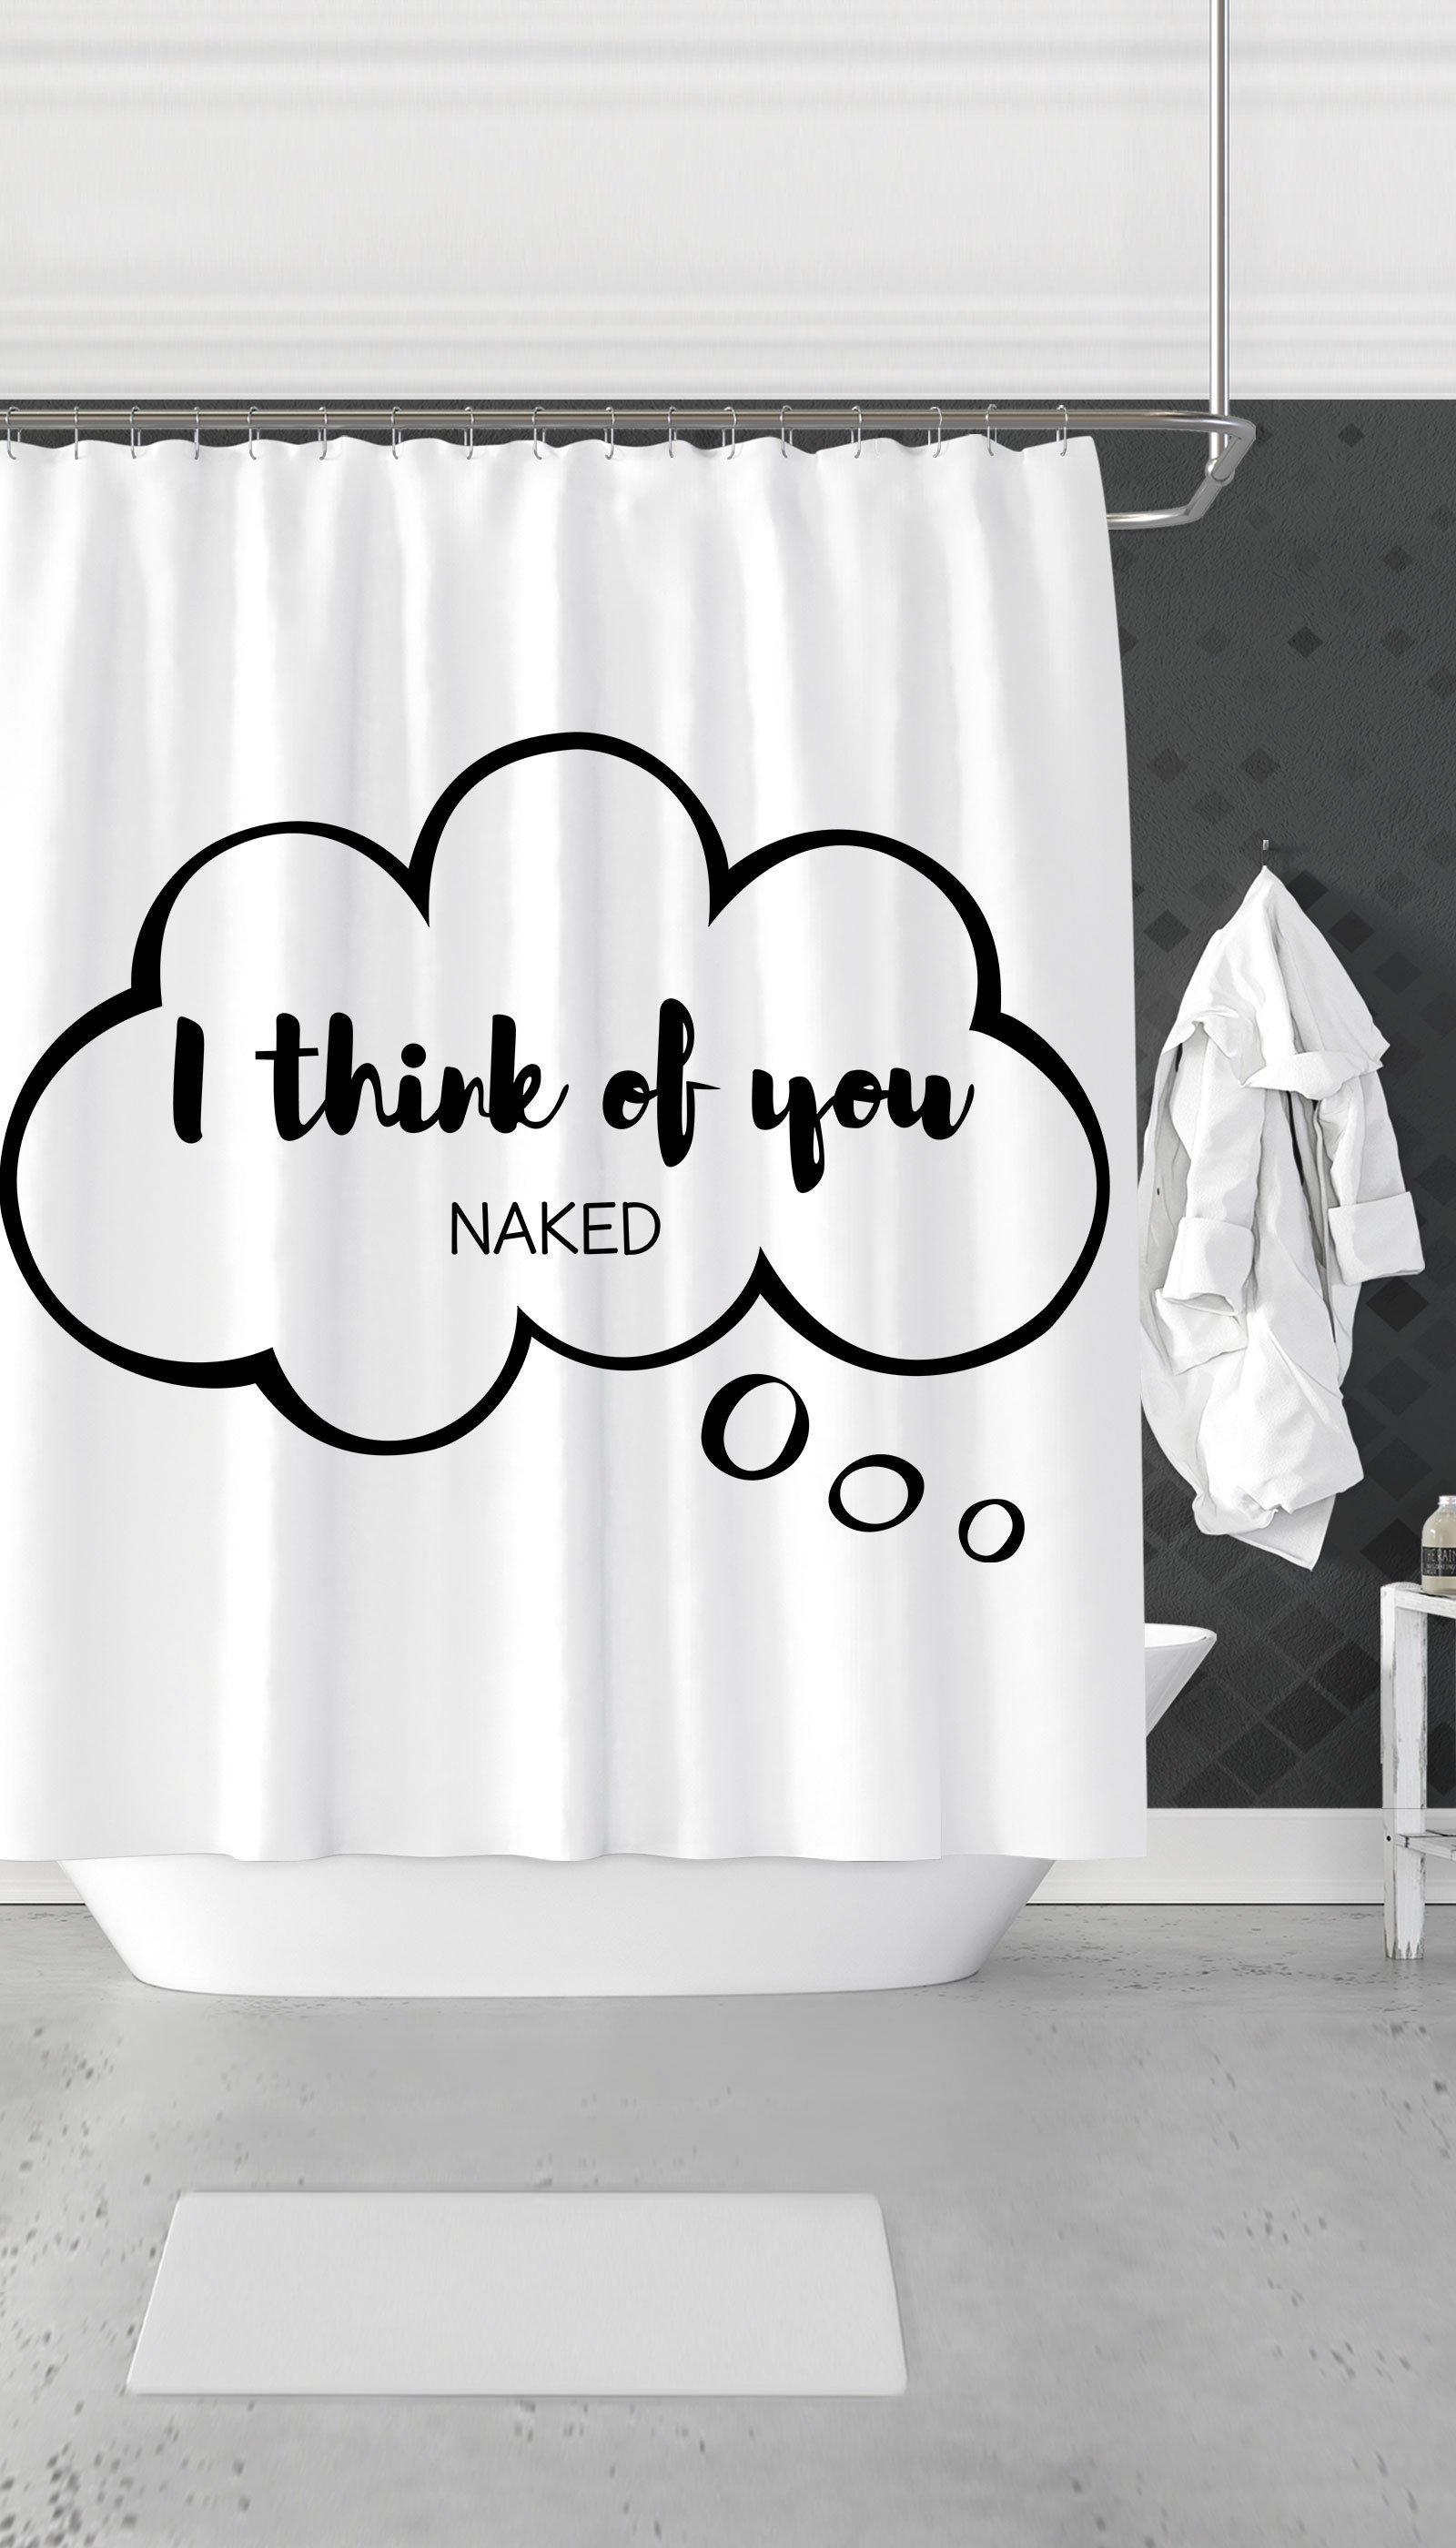 Armani reccomend Naked people shower curtain